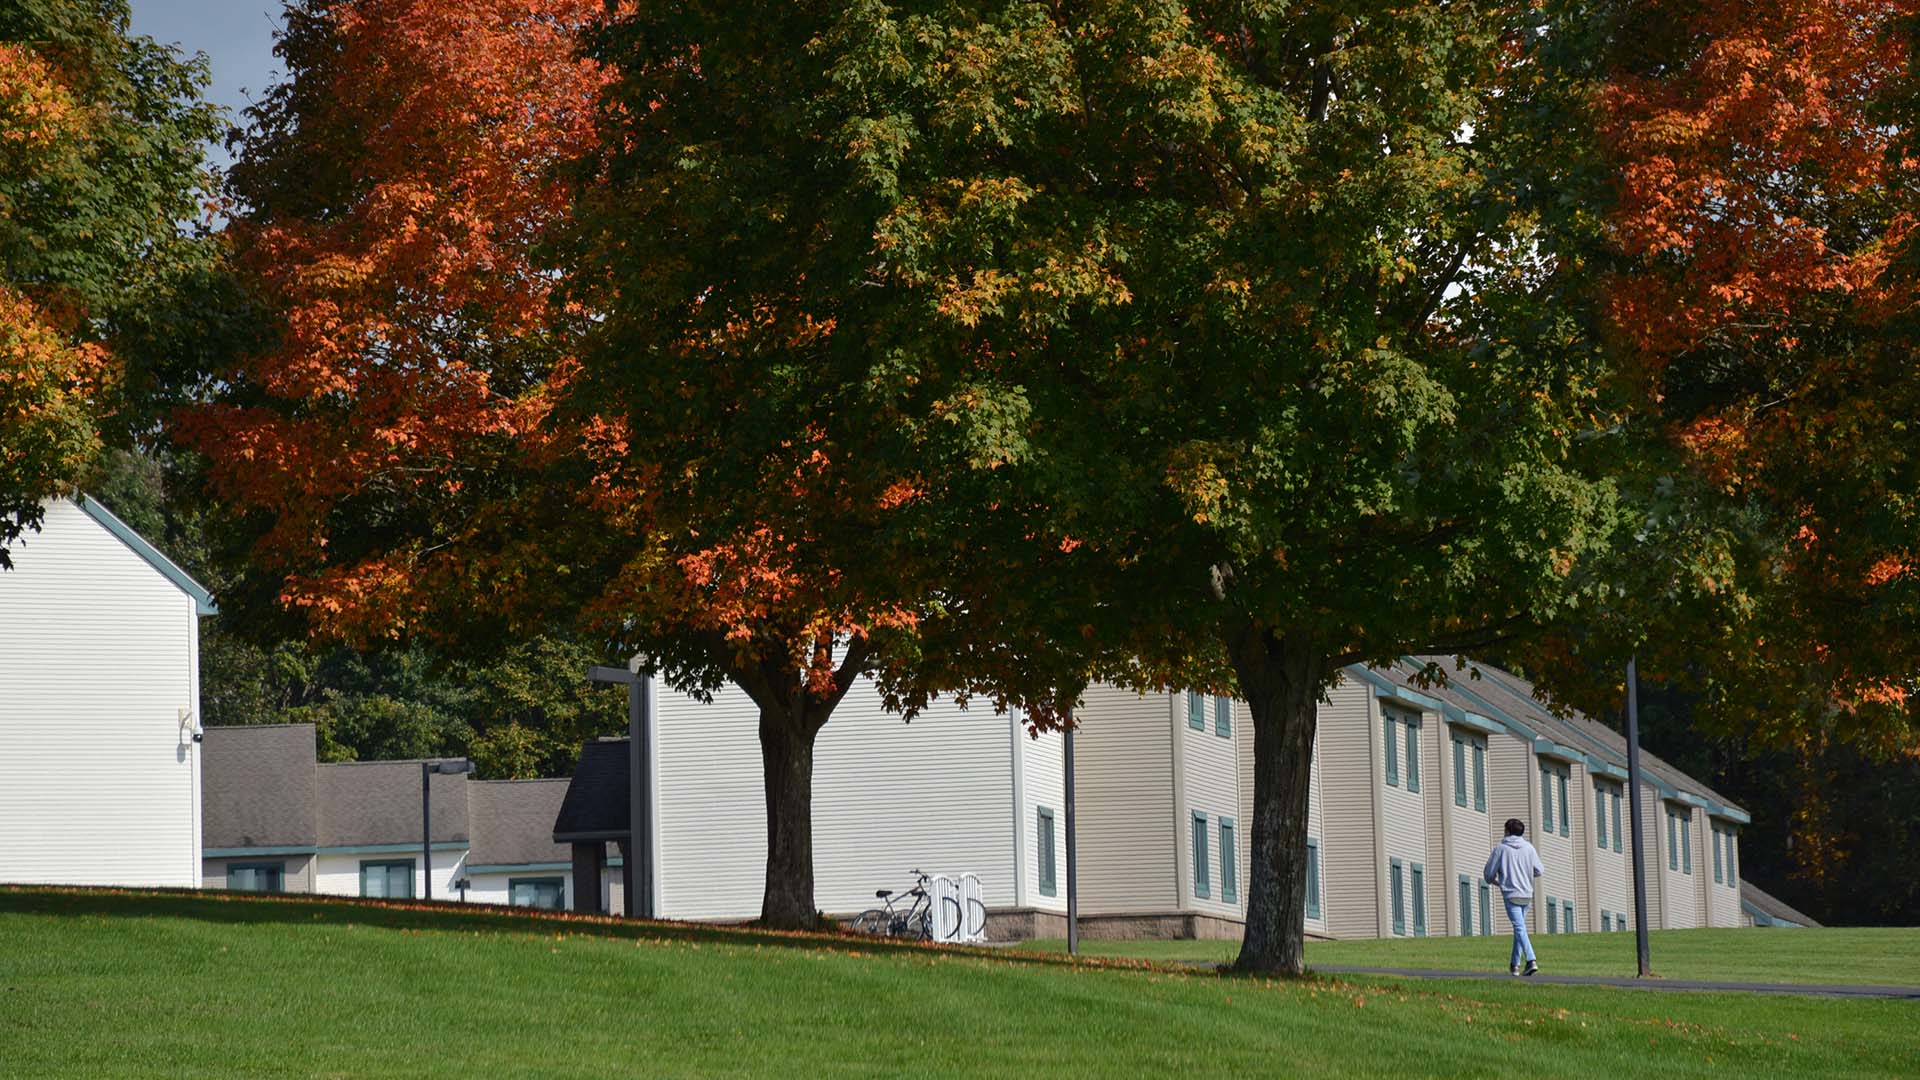 Photo of trees in the fall in front of residence halls